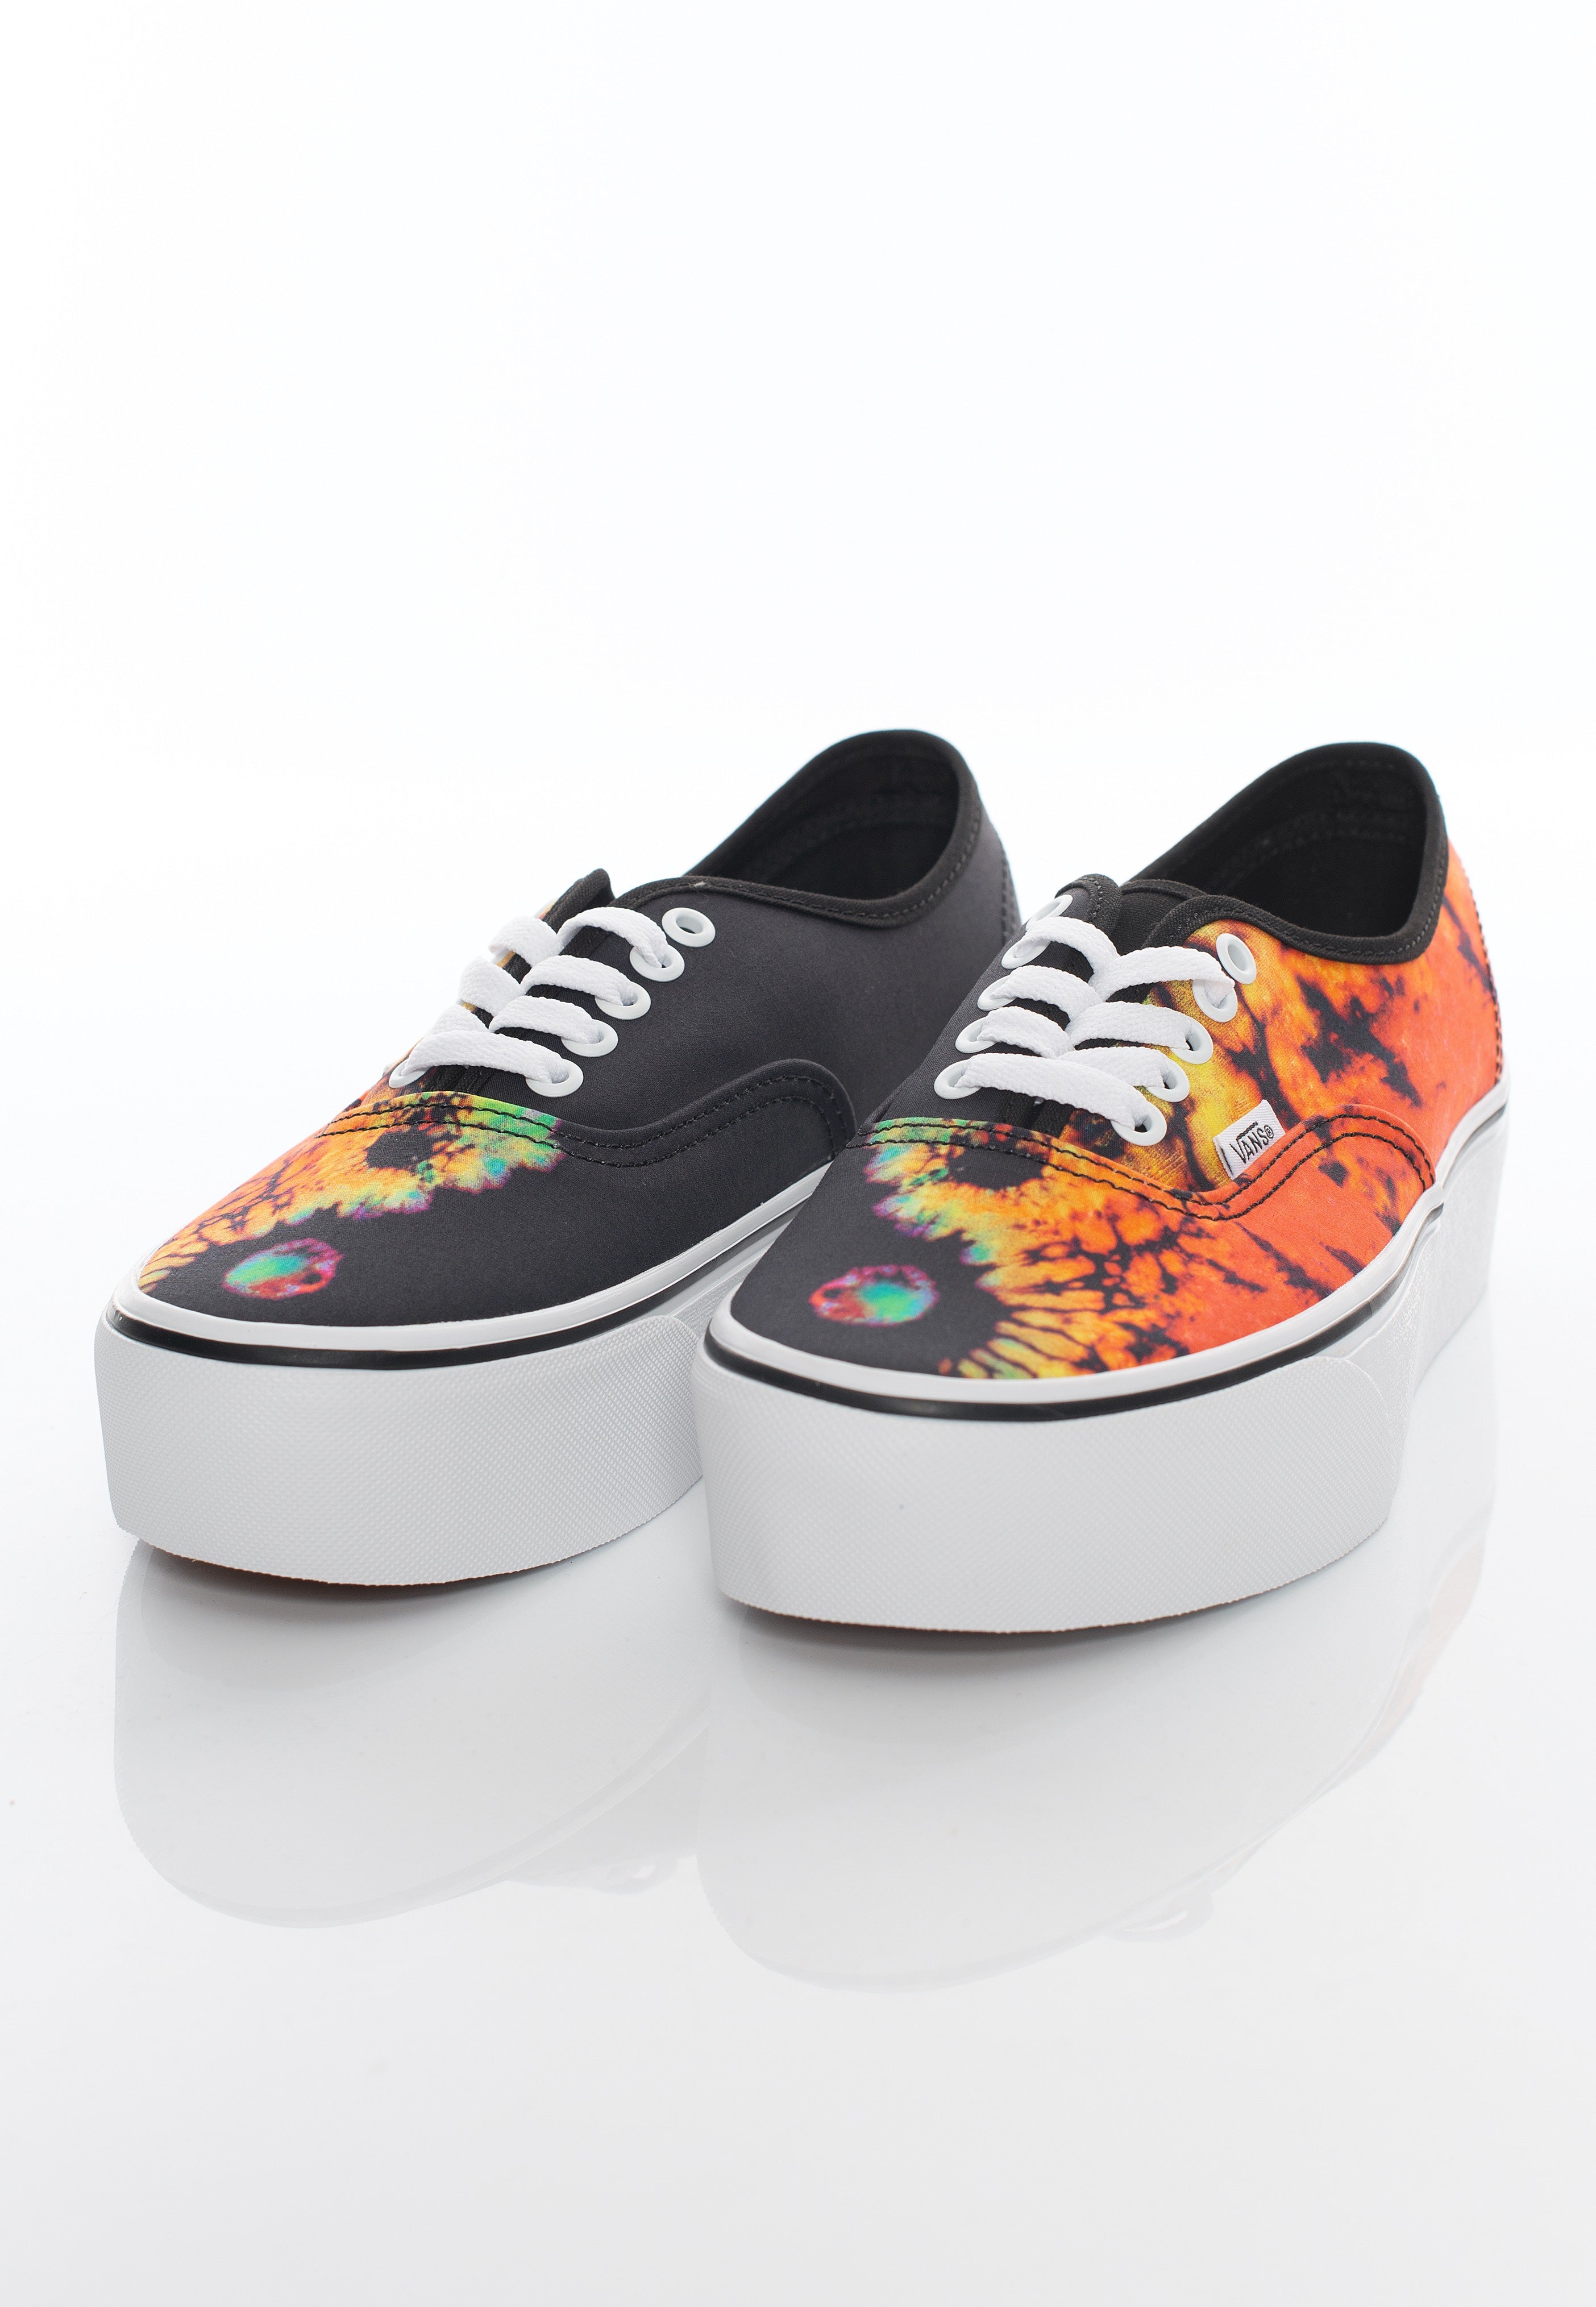 Vans - Authentic Stackform Paradoxical Black/Multi - Girl Shoes